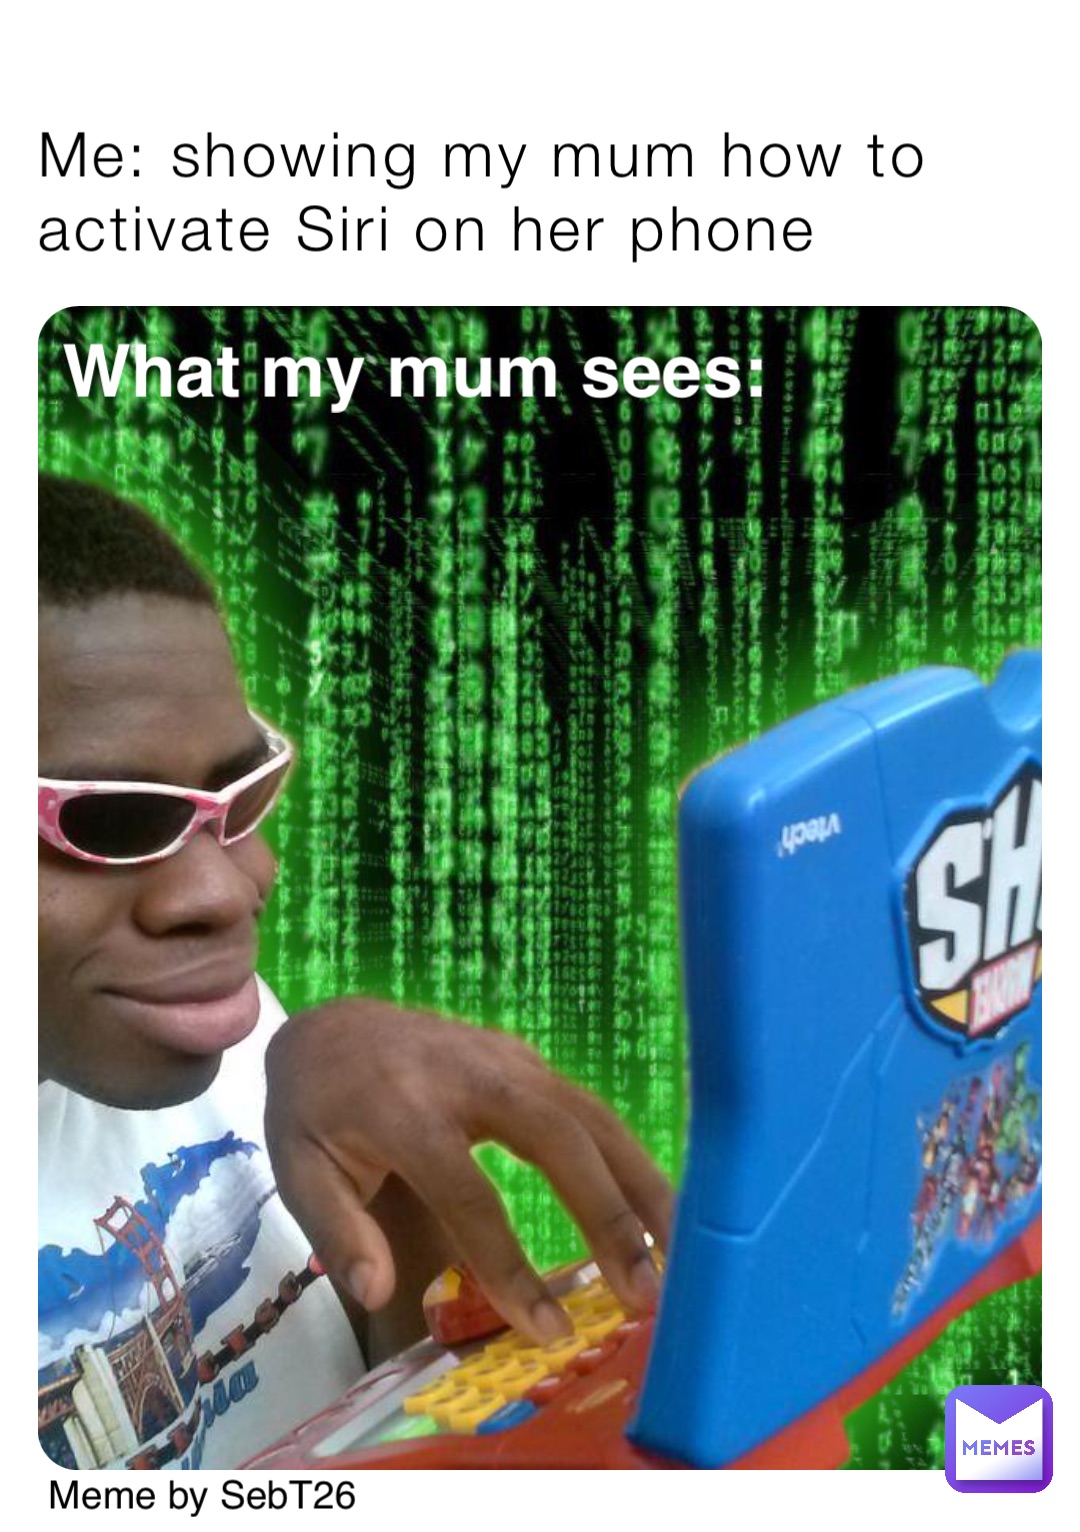 Me: showing my mum how to activate Siri on her phone What my mum sees: Meme by SebT26